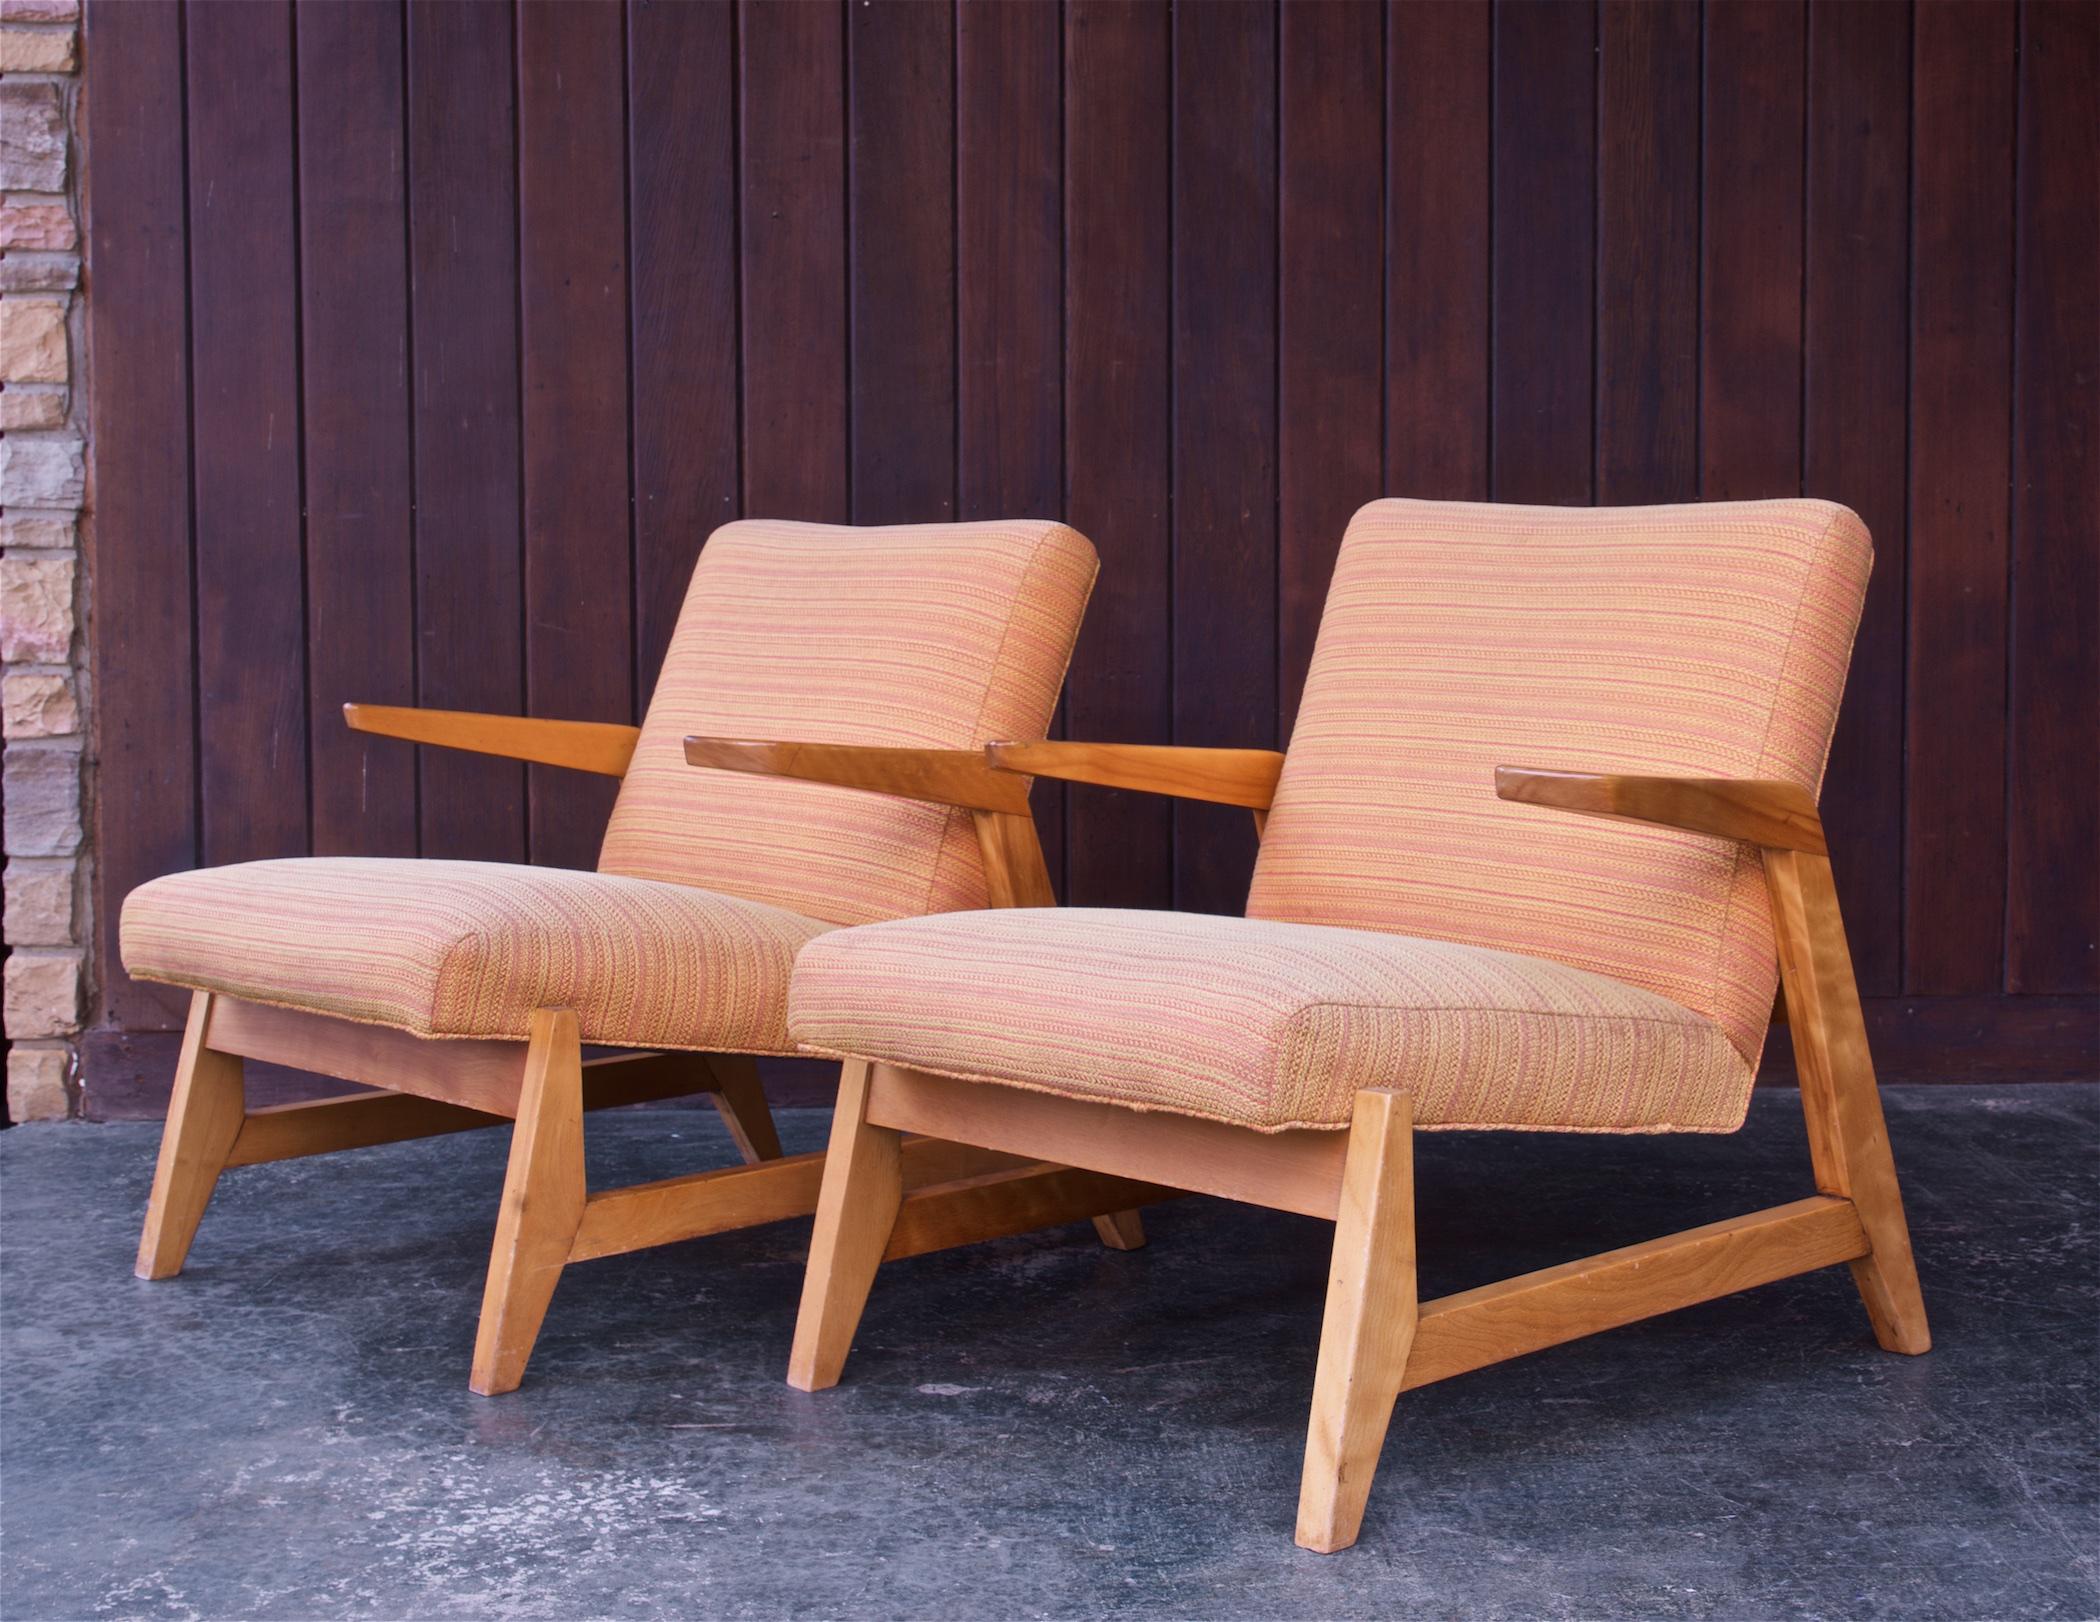 American Pair Mid-Century Greenbelt Lounge Chairs by Ralph Rapson for Knoll 1940s Modern For Sale